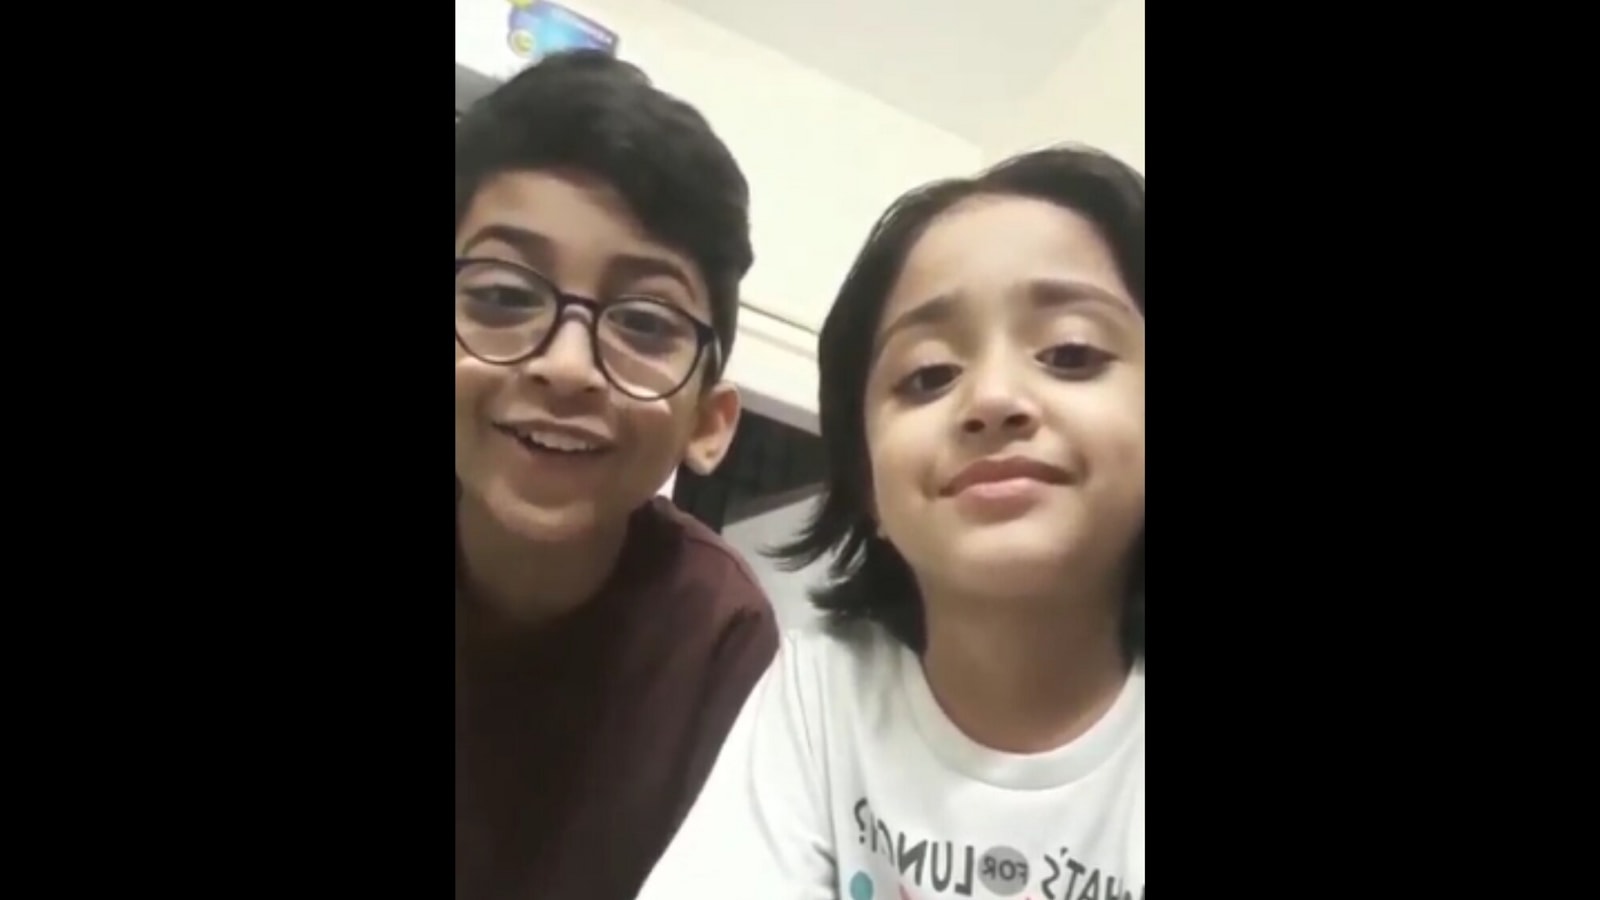 Cute little brother-sister duos video goes viral, Yashraj Mukhate reacts pic